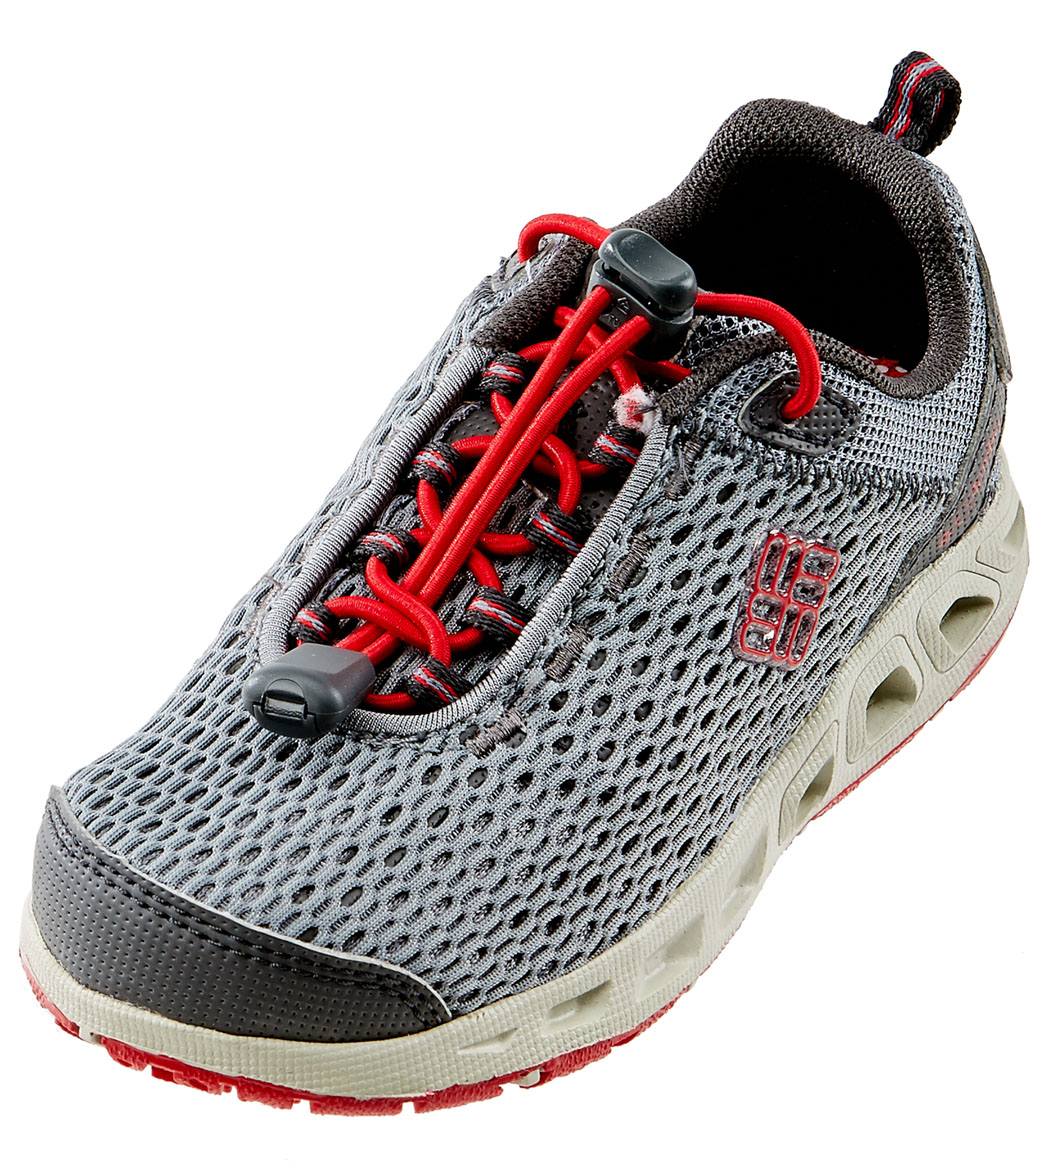 Columbia Kids' Drainmaker Iii Water Shoes - Grey Ash/Mountain Red 8 Rubber - Swimoutlet.com